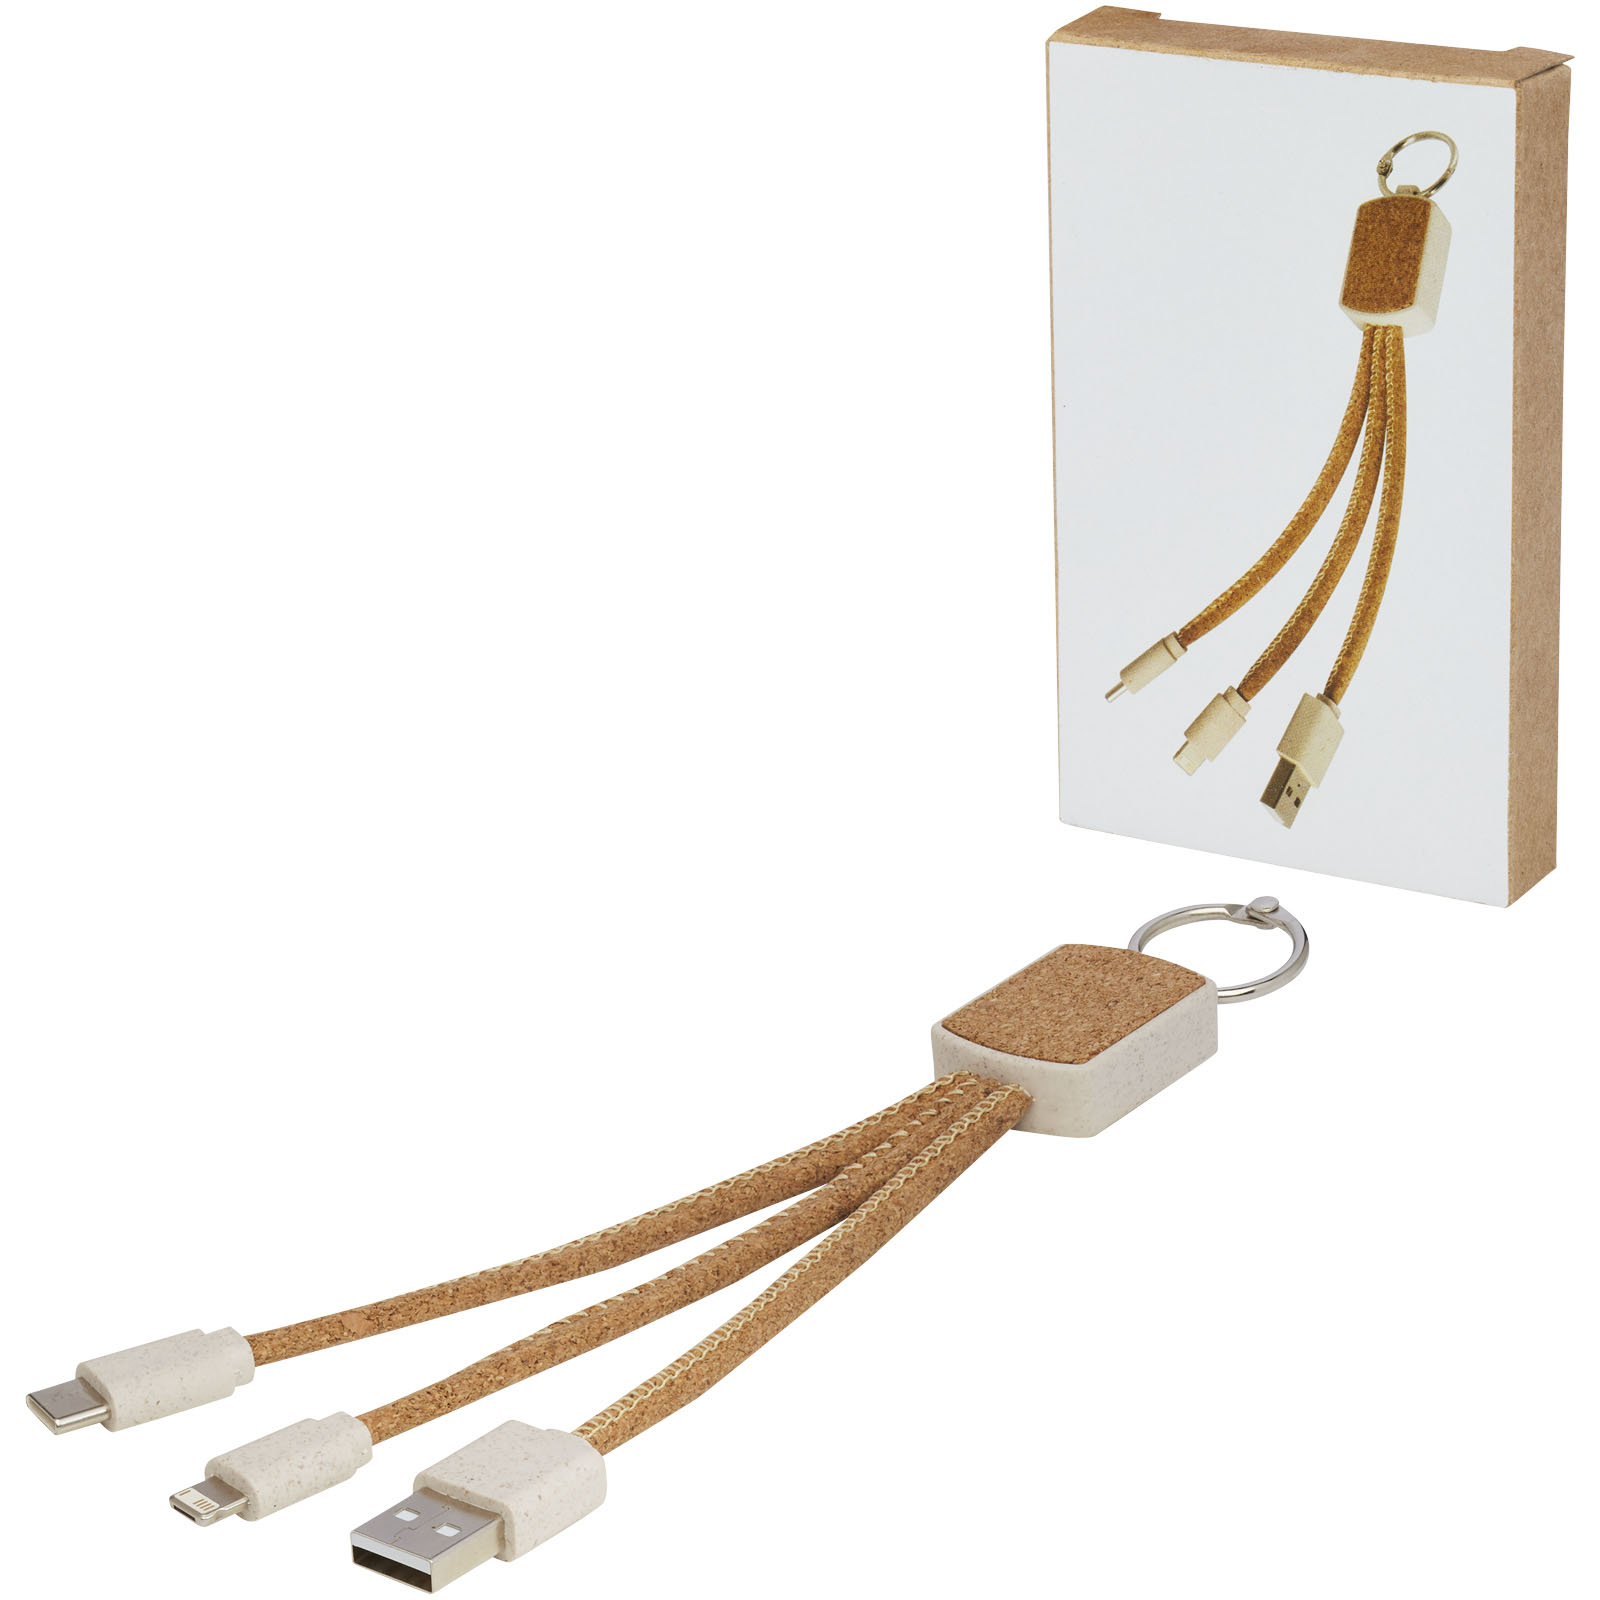 Advertising Cables - Bates wheat straw and cork 3-in-1 charging cable - 4